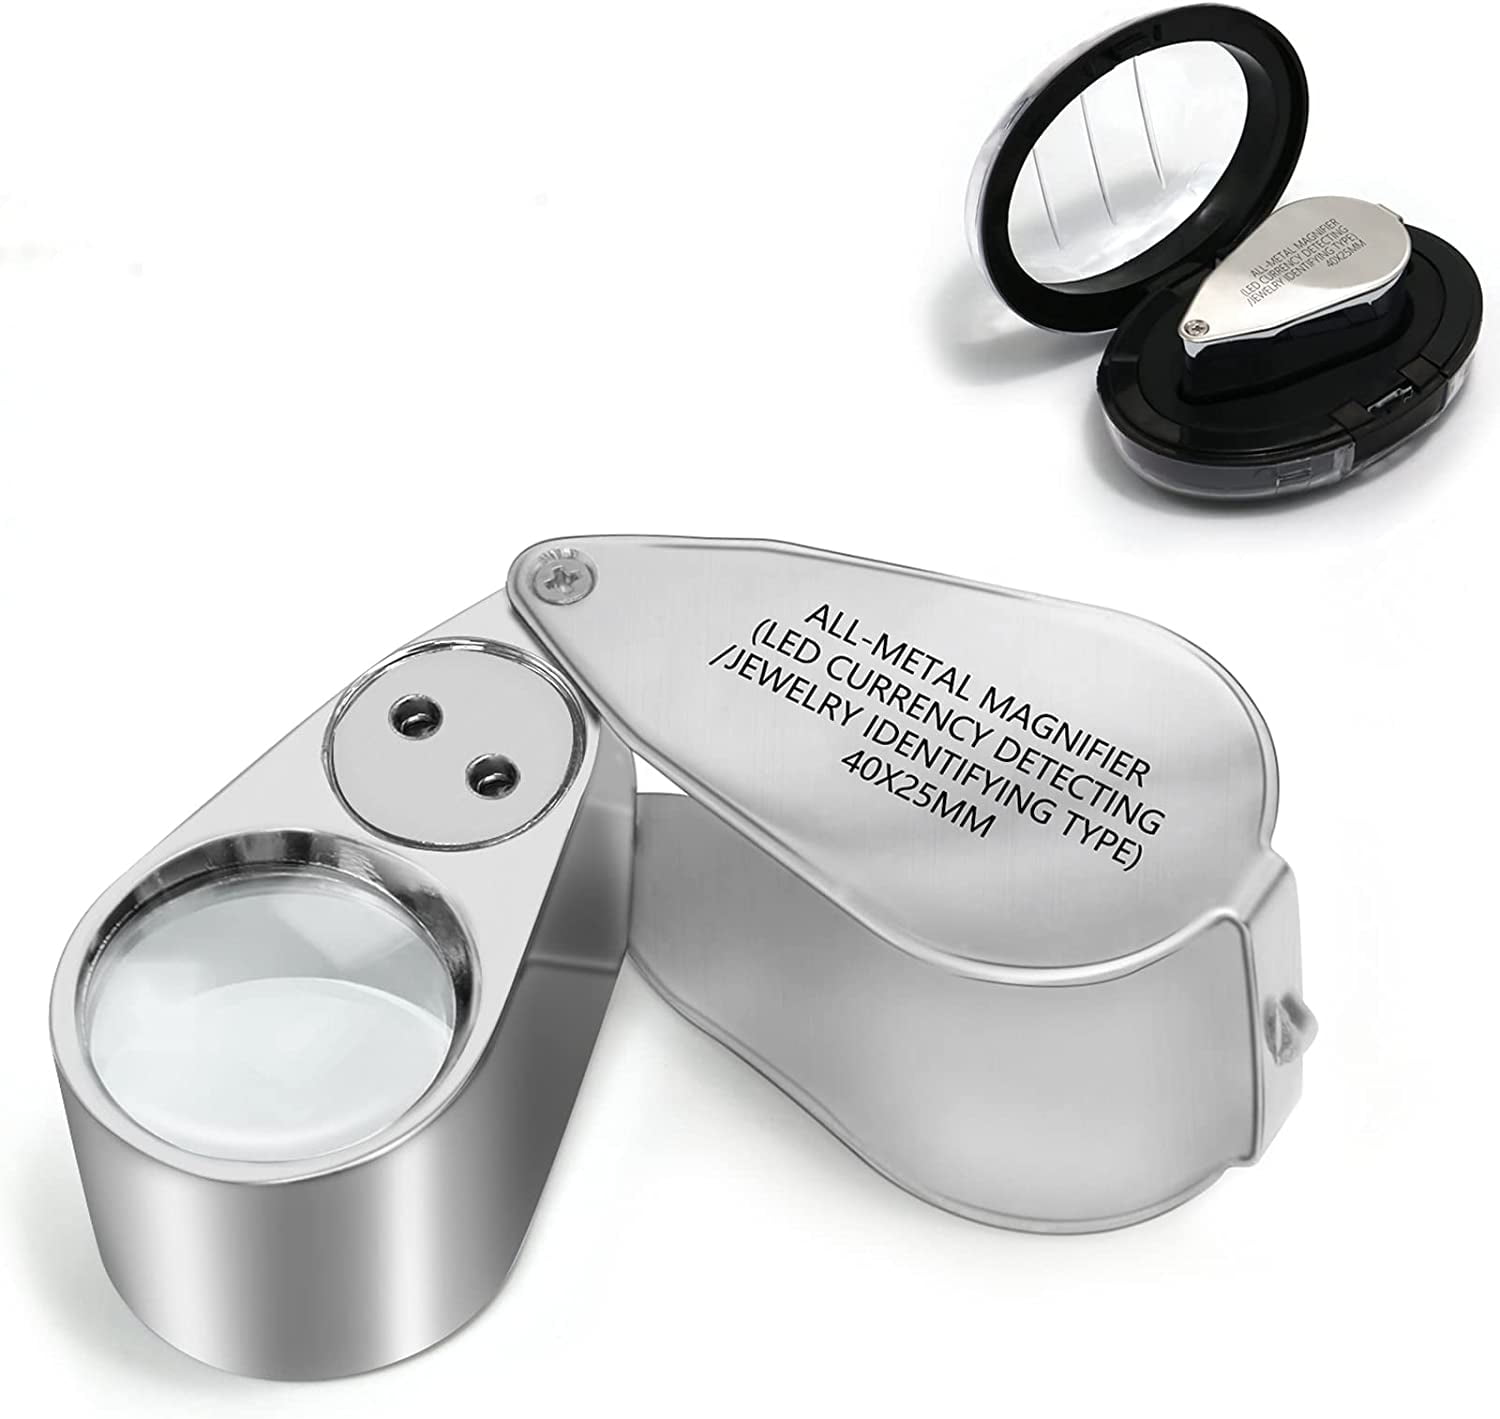 40x Illuminated Jeweler LED UV Lens Loupe Magnifier with Metal Construction and Optical Glass, with Kare and Kind Retail Package (40x x 25 mm, Silver)